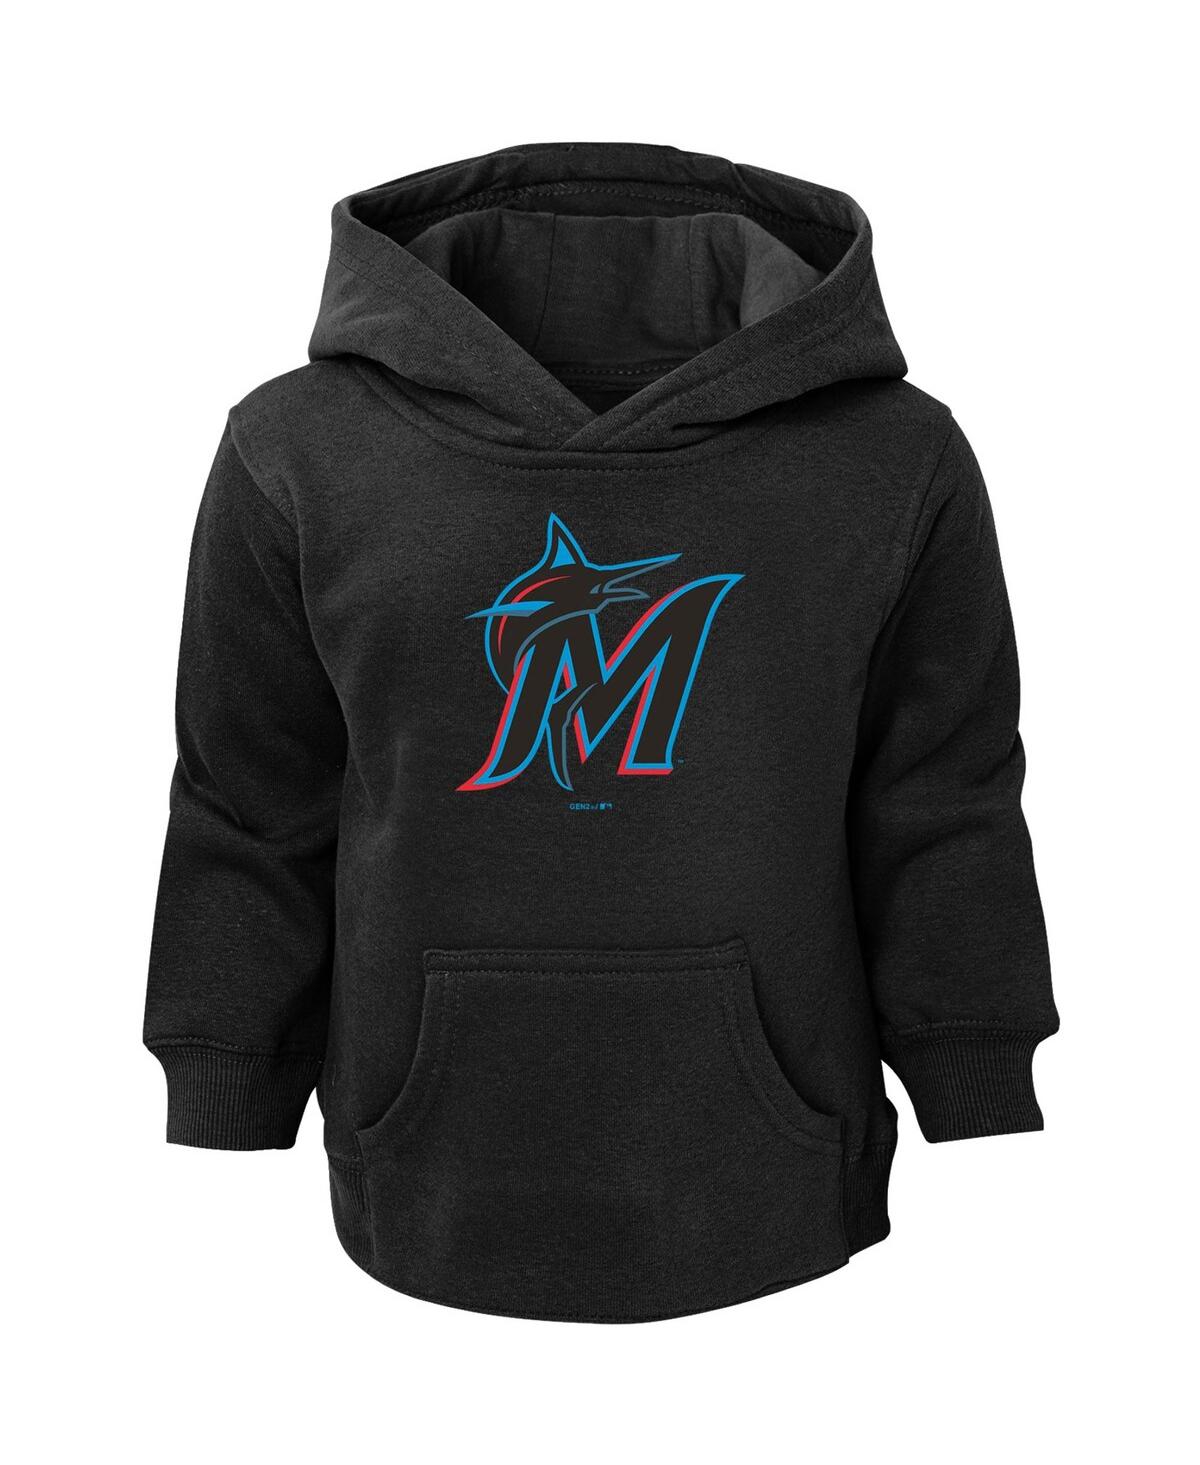 Outerstuff Babies' Toddler Boys And Girls Black Miami Marlins Primary Logo Pullover Hoodie